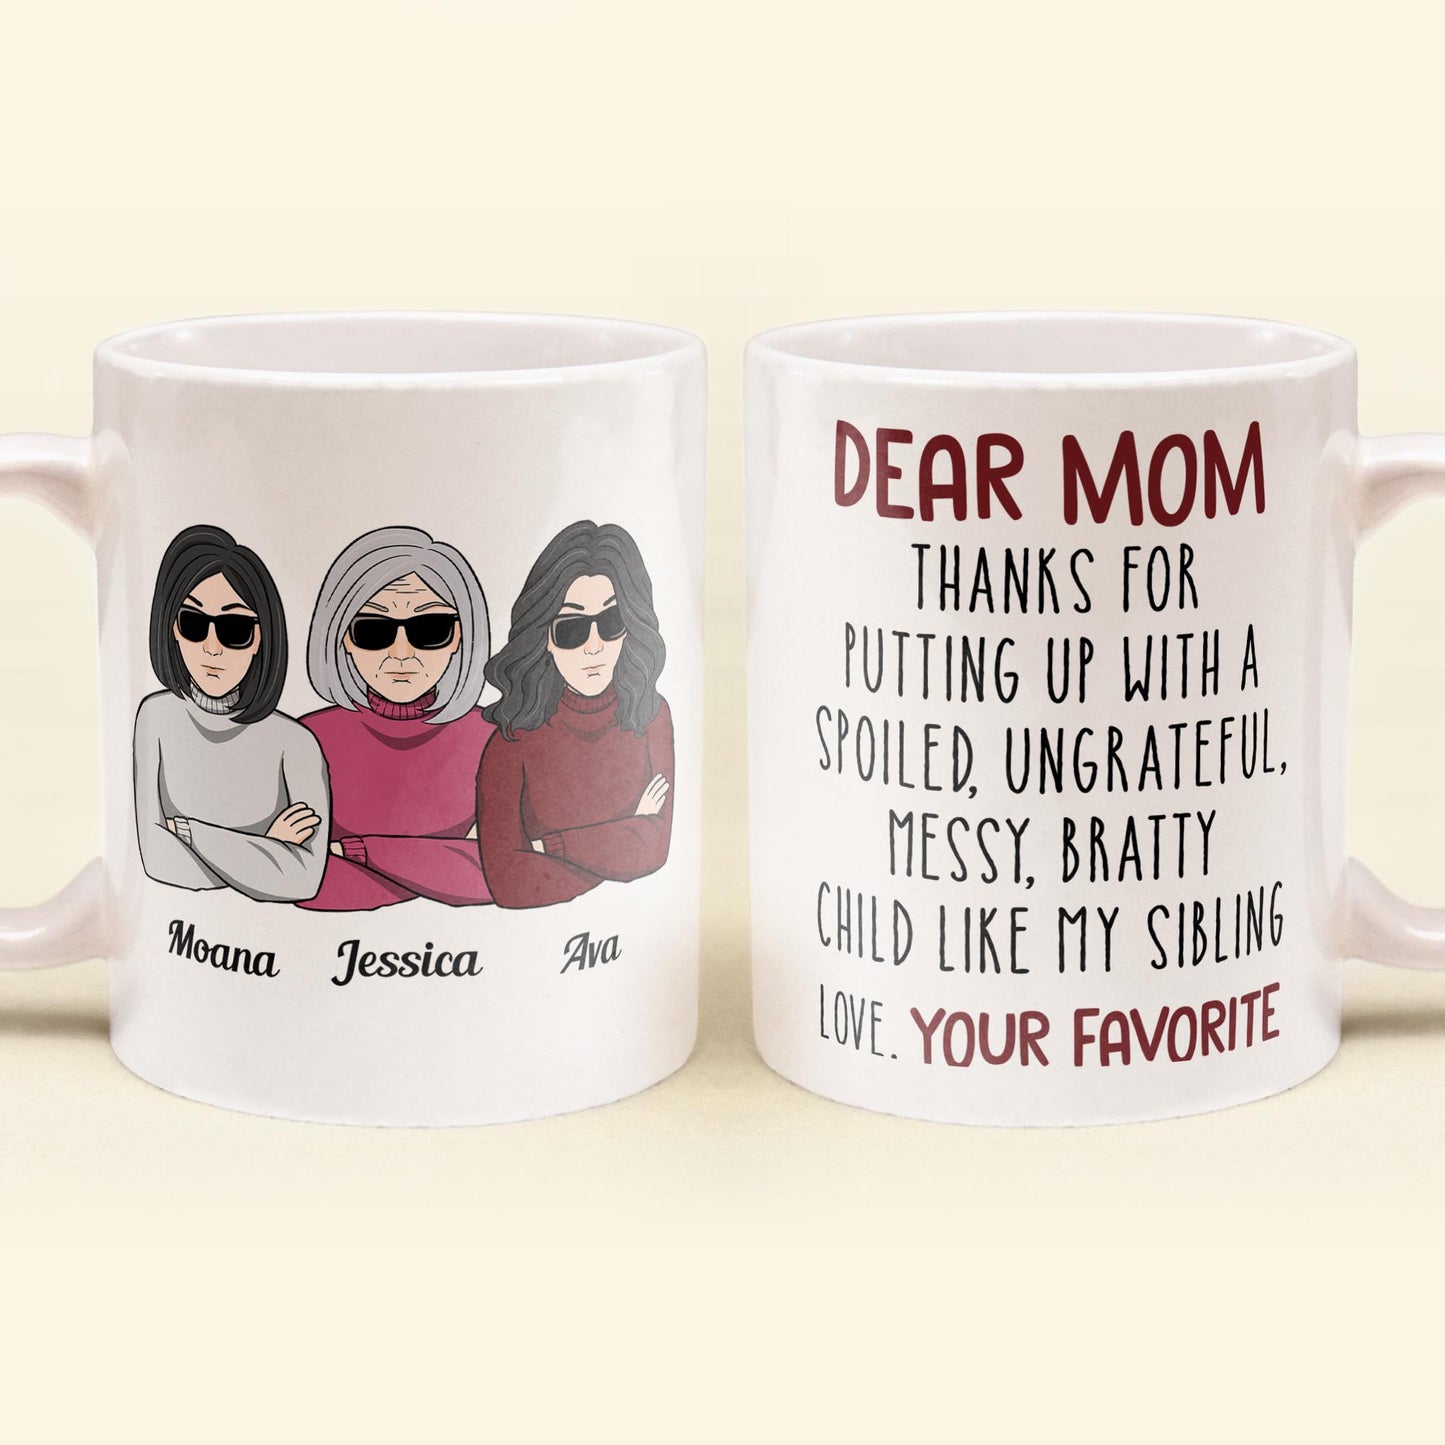 Thanks For Putting Up With A Bratty Child - Personalized Mug - BirthdayGift For Mothers